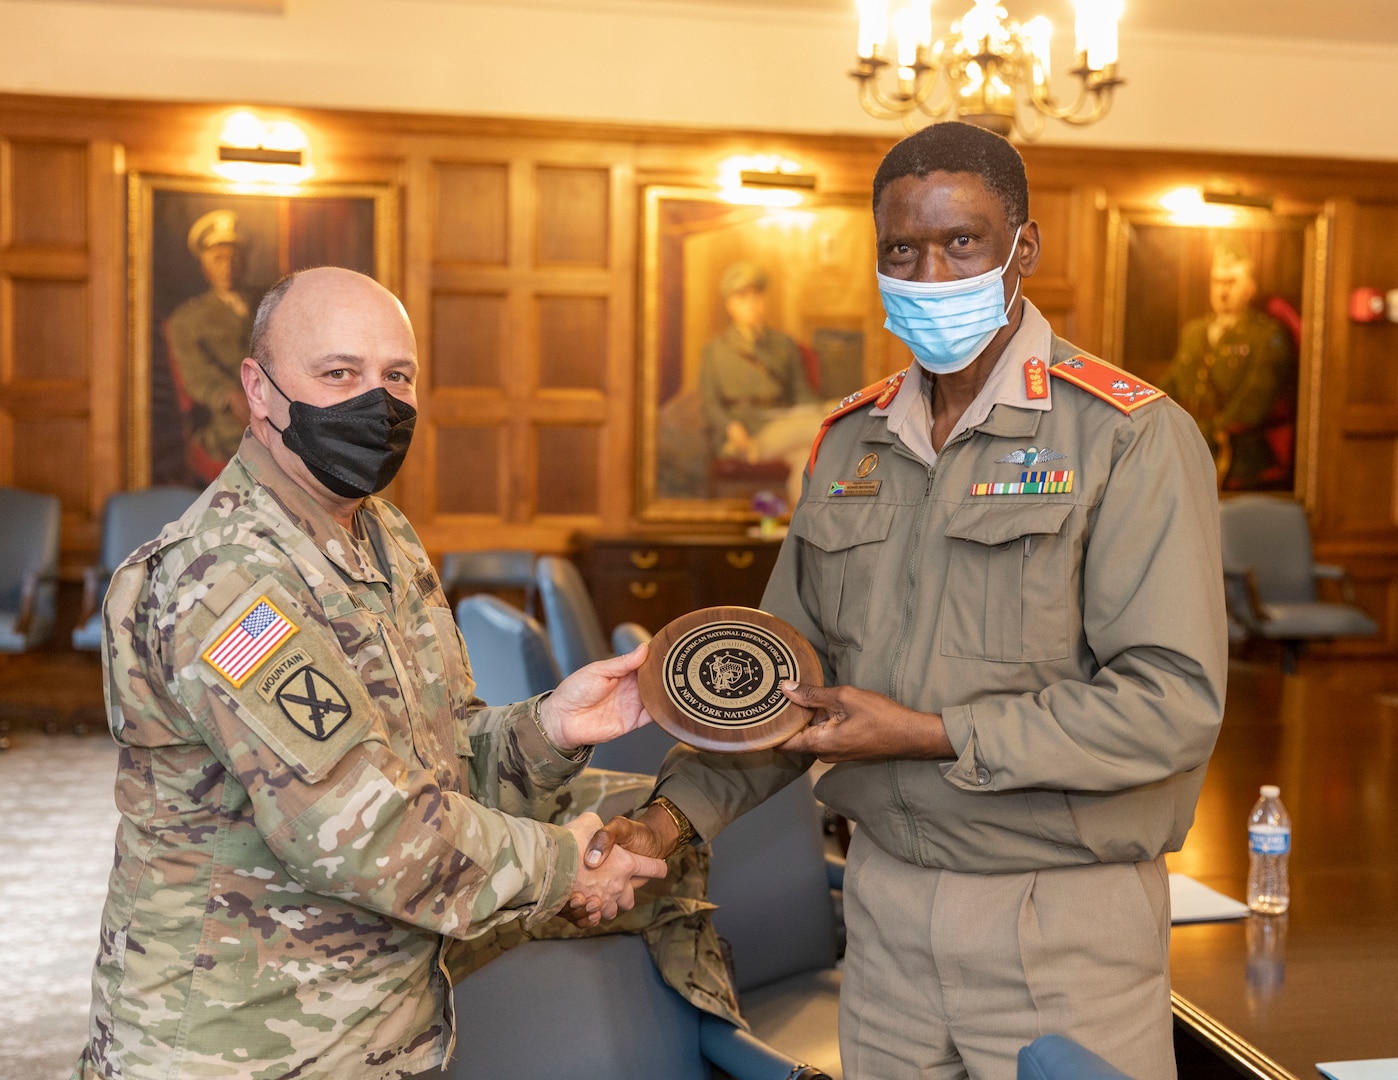 New York National Guard Maj. Gen. Michel Natali, the assistant adjutant general, presents a plaque to Brig. Gen. Richard Maponyane, the South Africa defense attaché, in New York Dec. 9, 2021, during a meeting to discuss State Partnership Program initiatives. The New York Army National Guard and South Africa have been partners in the program since 2003.